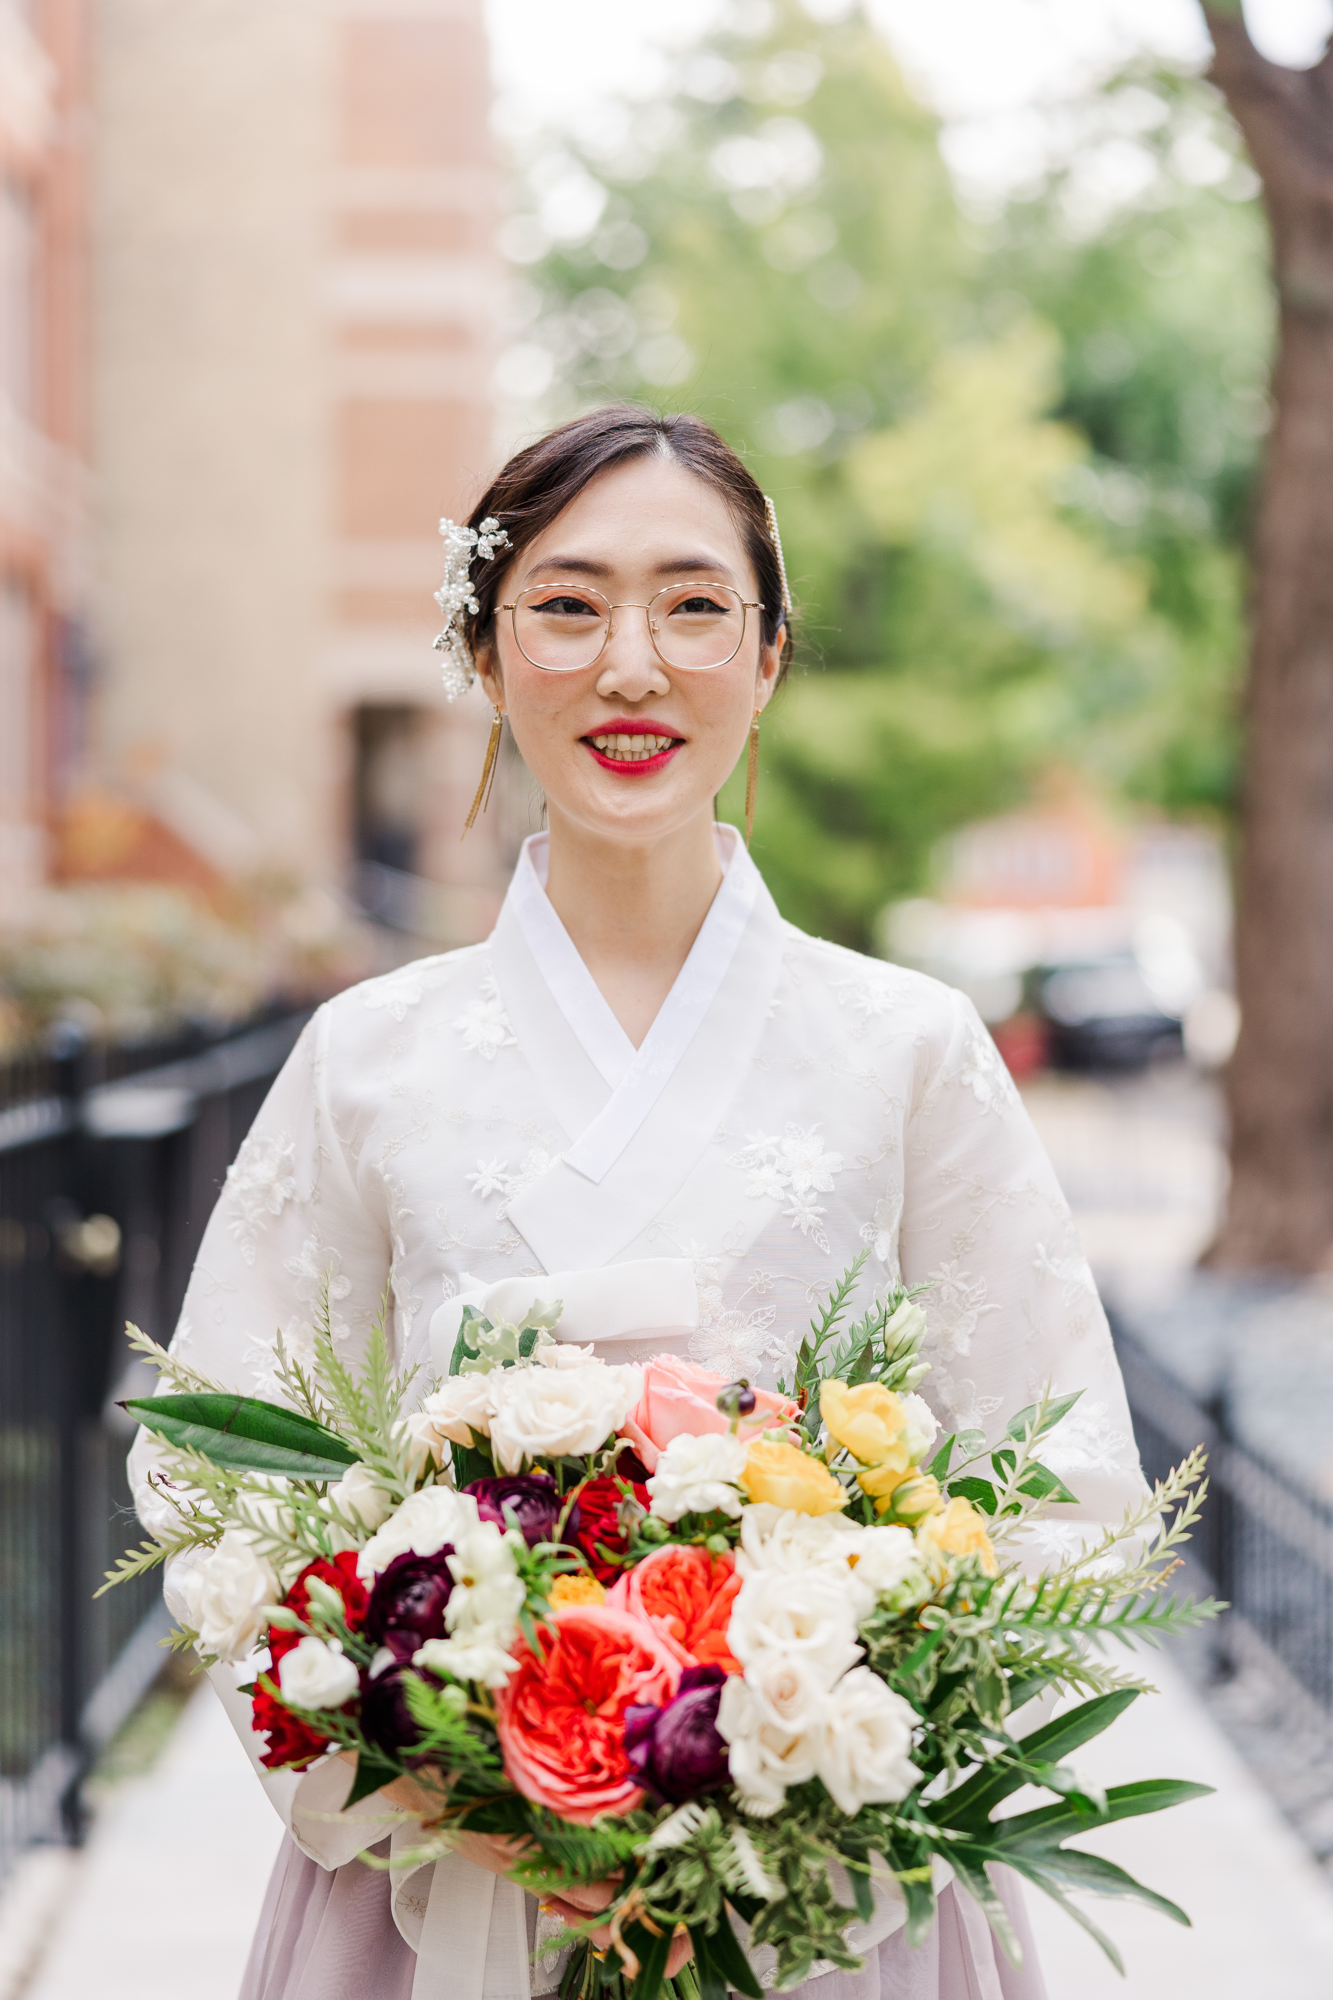 Eye-catching Chicago Micro Wedding Photos at Wicker Park Inn in Fall